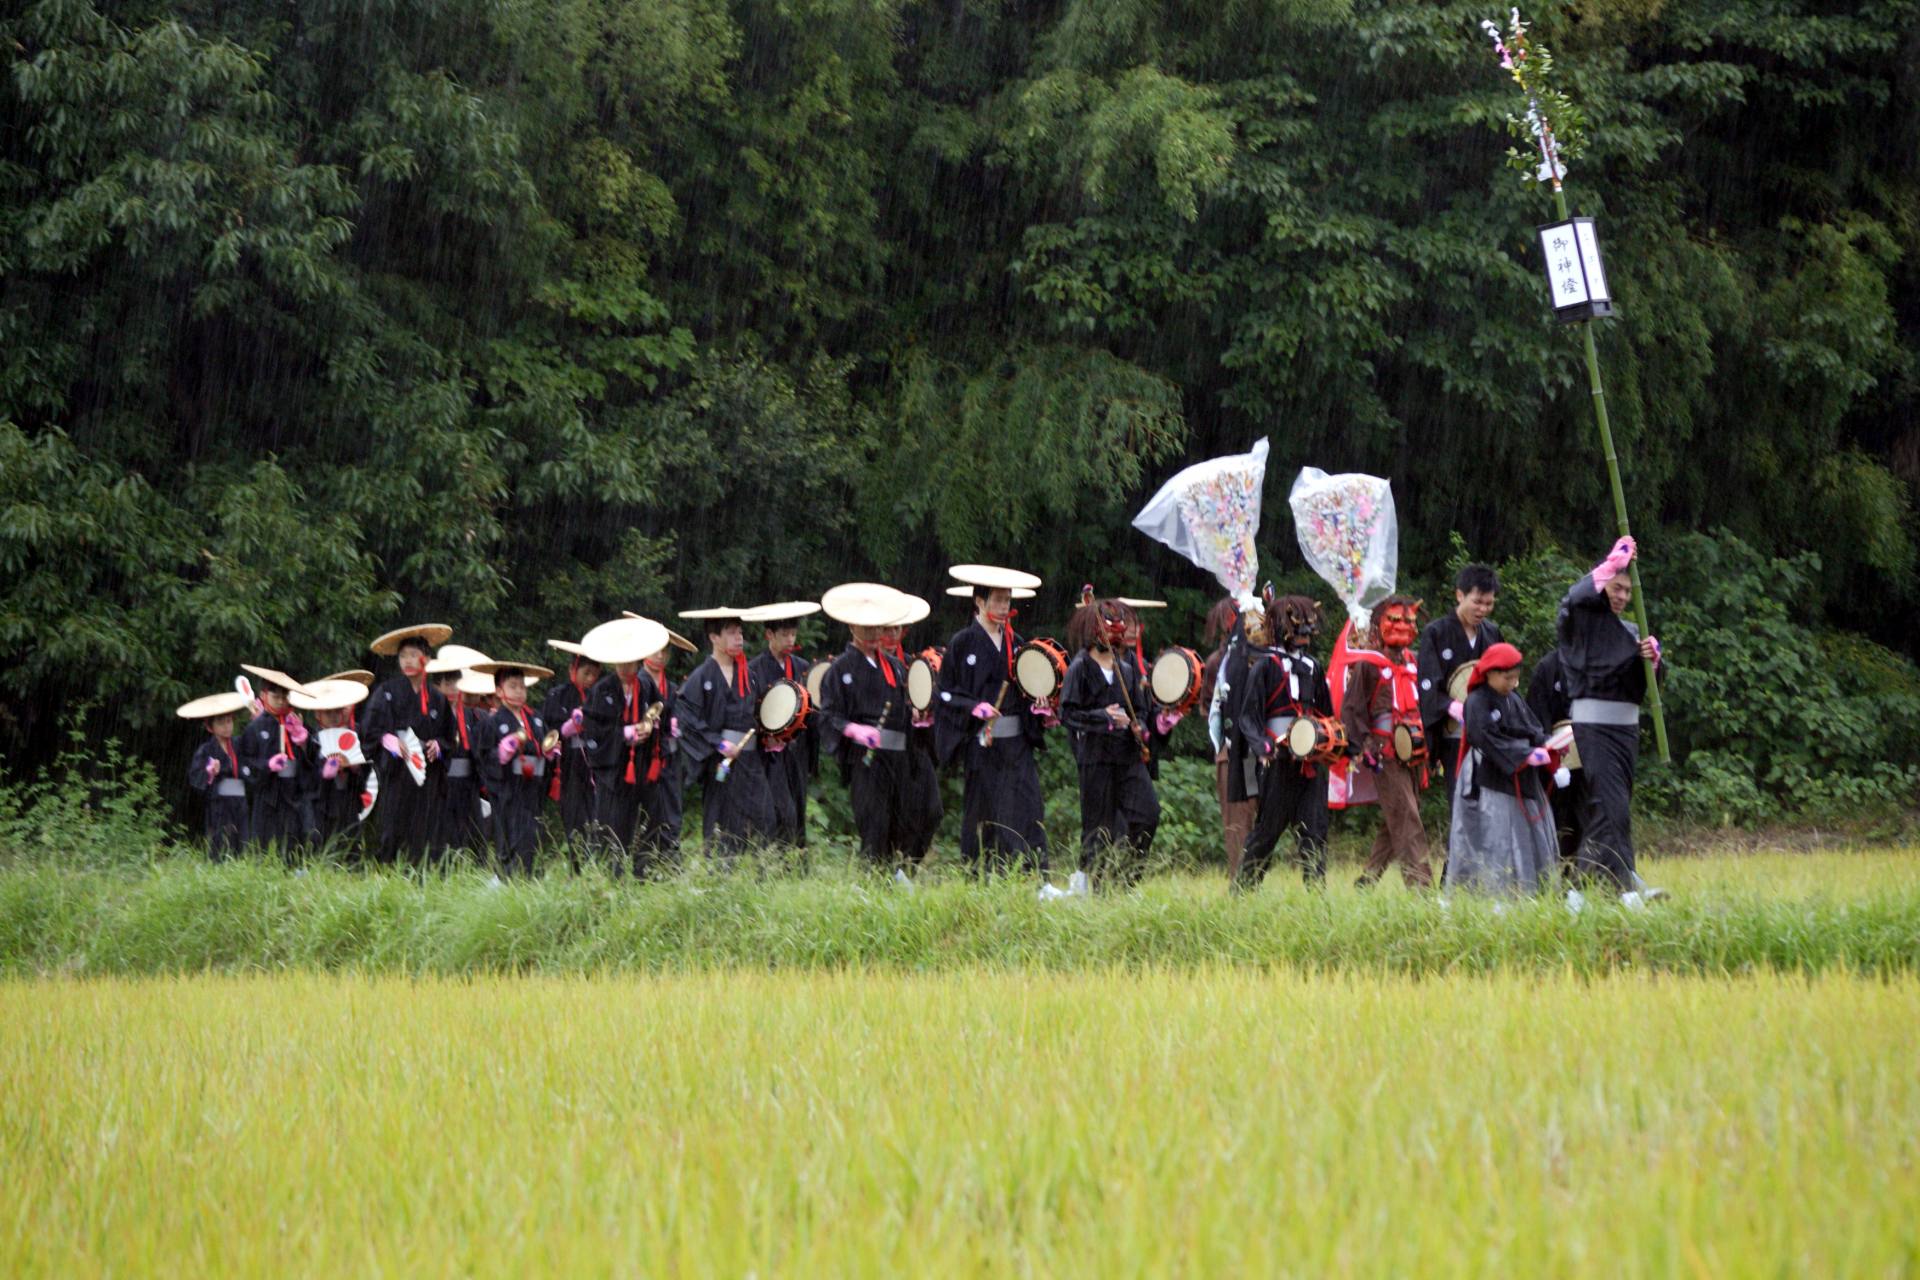 A procession marching through the village while singing. The villagers know that the festival has arrived once they hear the singers.